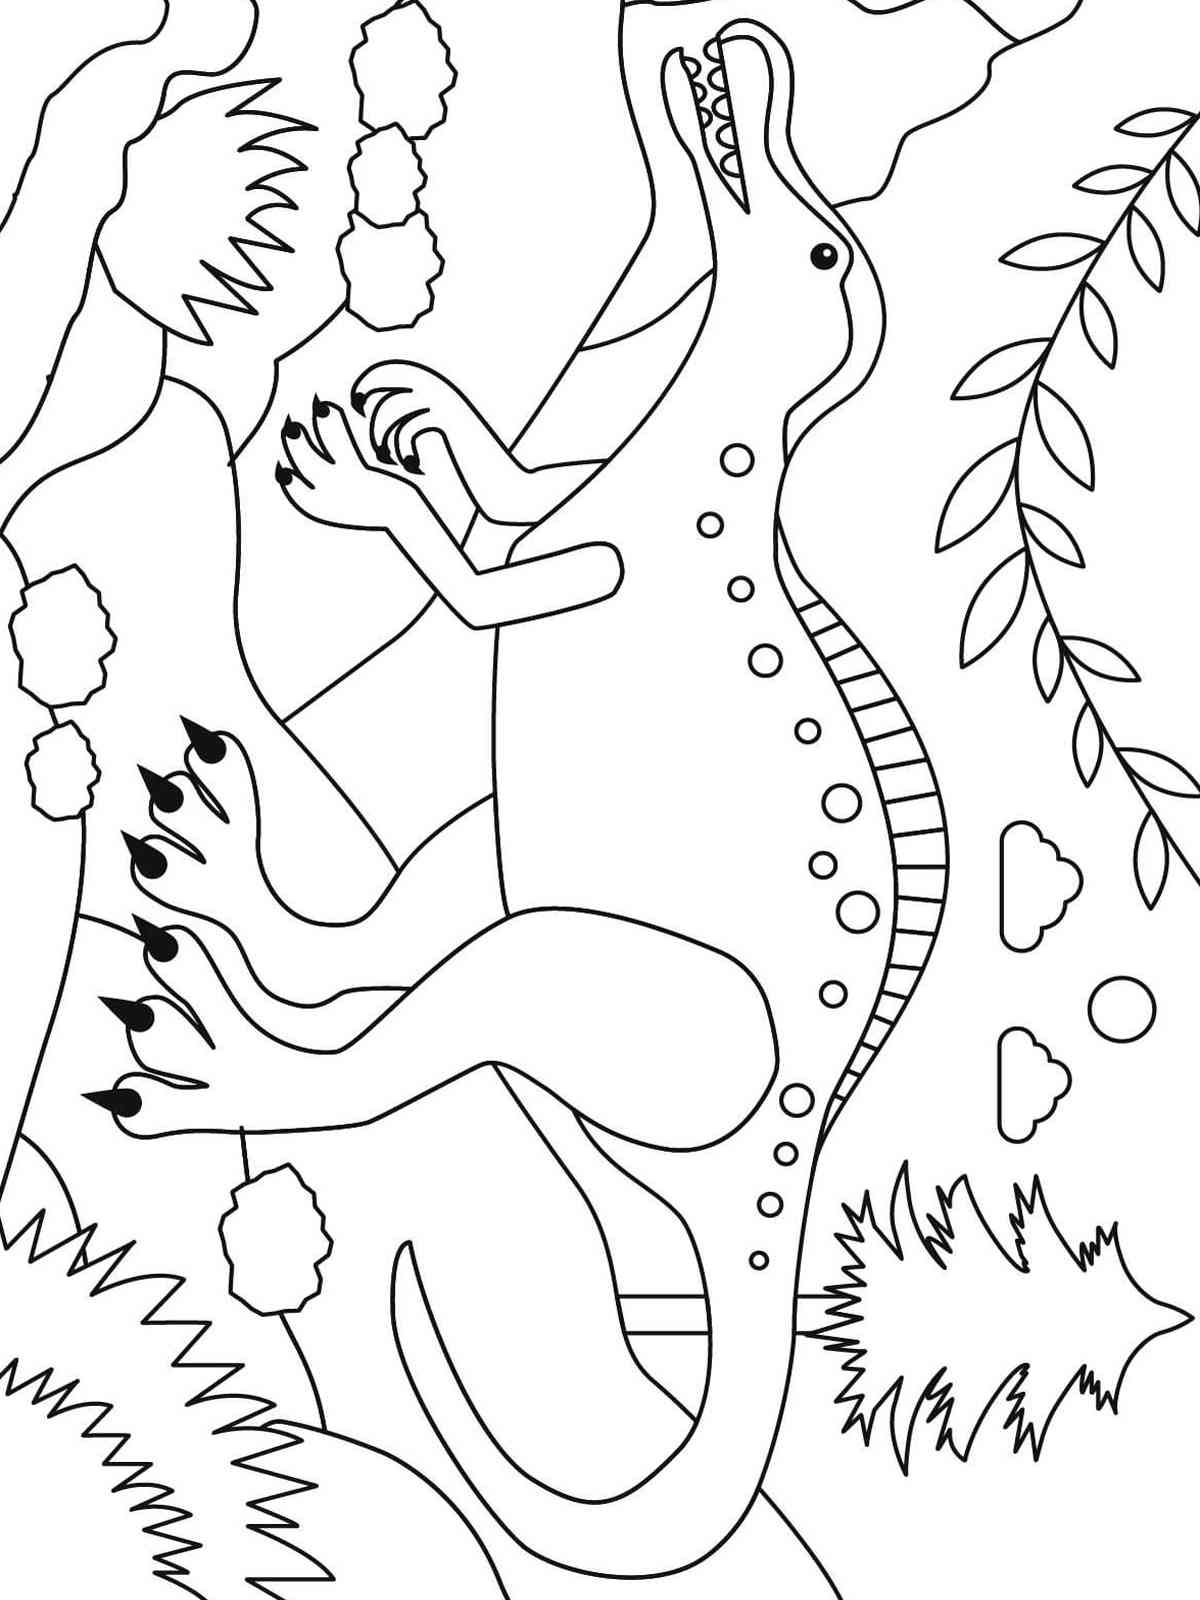 Suchomimus coloring page